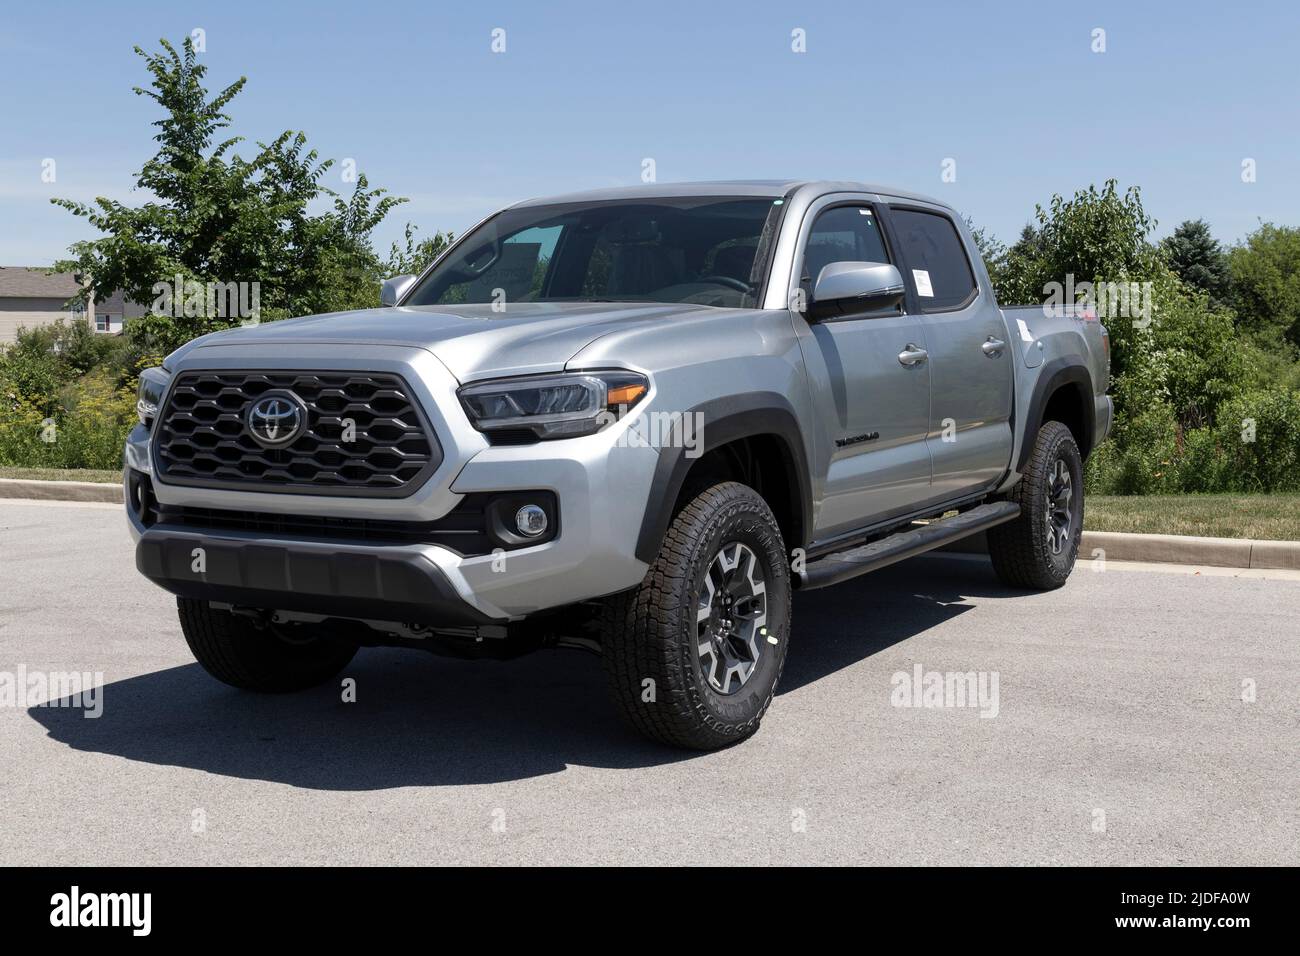 Whitestown - Circa June 2022: Toyota Tacoma display. Toyota offers the Tacoma in SR, SR5, and TRD Sport models. Stock Photo